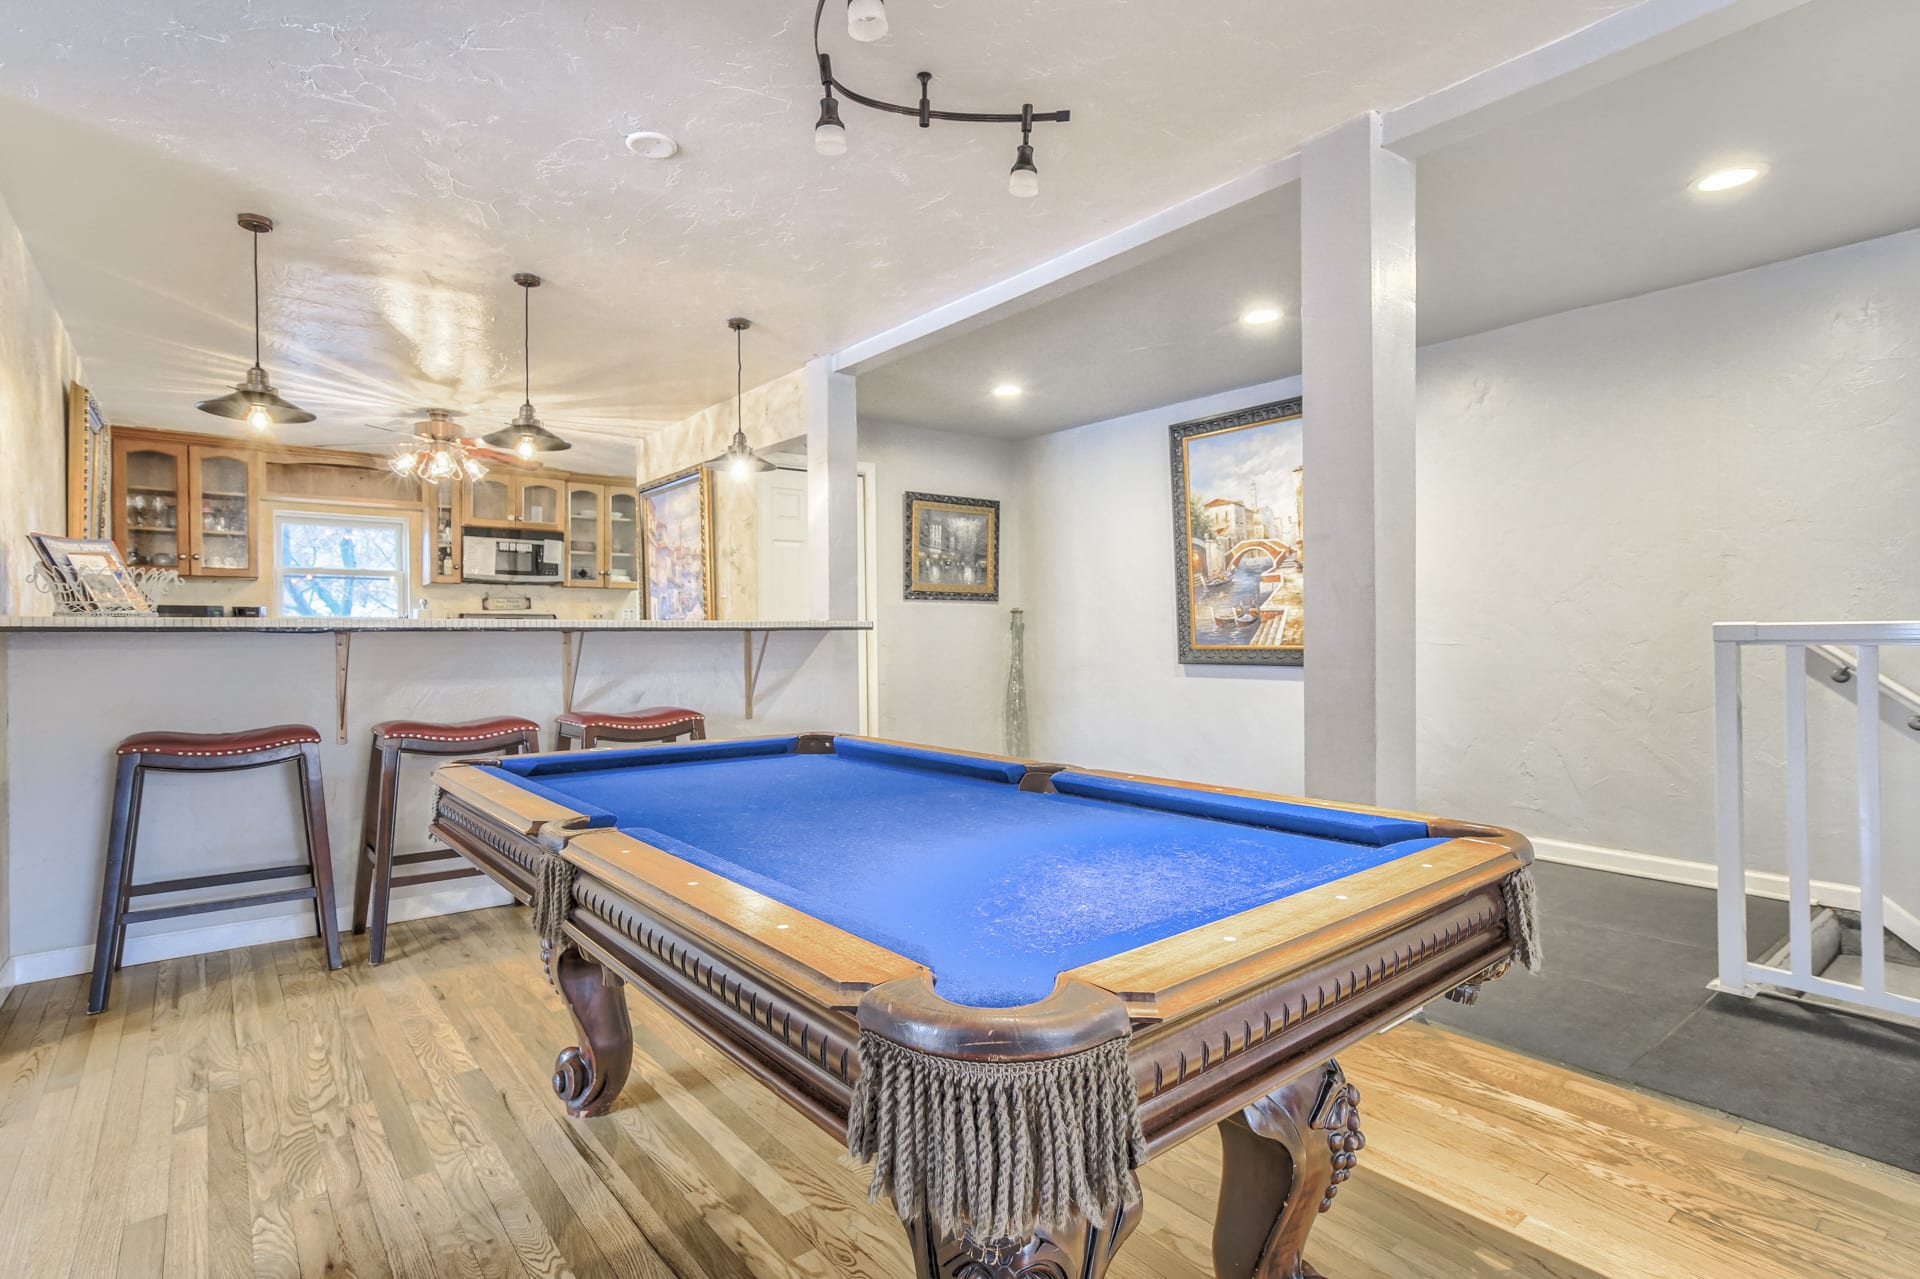 Property Image 2 - 2BD Art Gallery Old Colorado City Pool Table